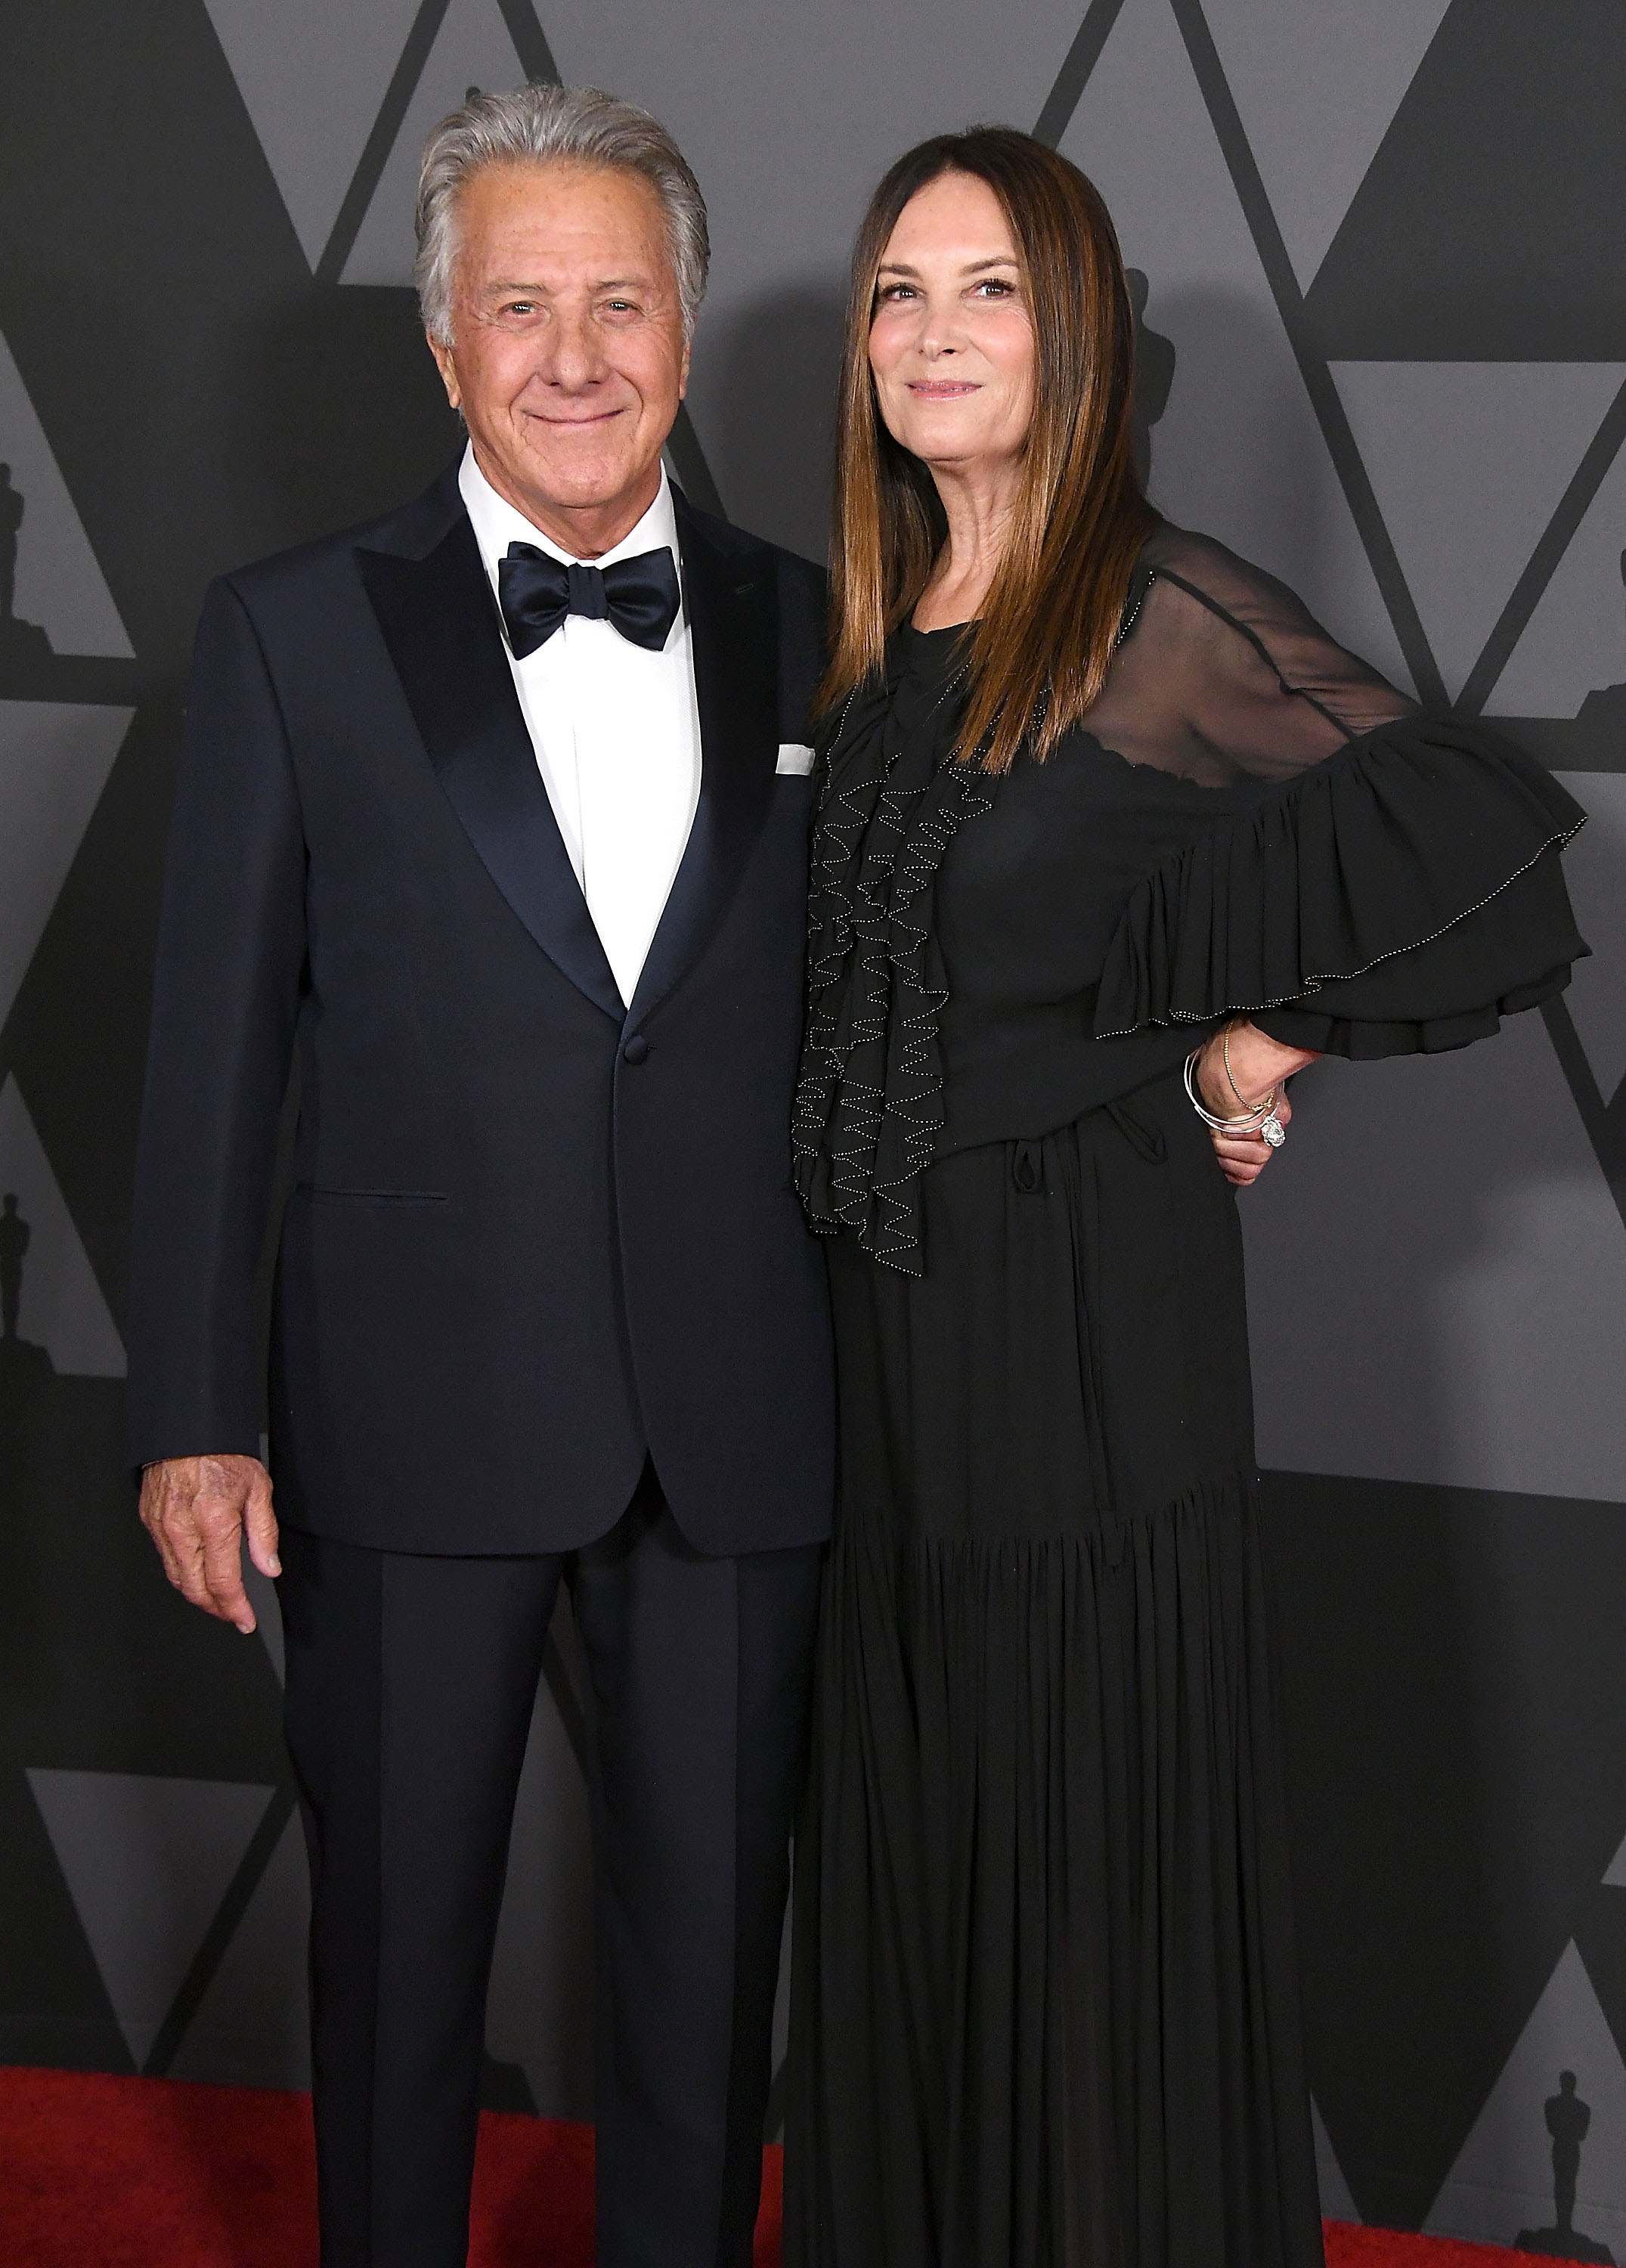 Dustin Hoffman and Lisa Hoffman at the Academy Of Motion Picture Arts And Sciences' 9th Annual Governors Awards in Hollywood, California on November 11, 2017. | Source: Getty Images